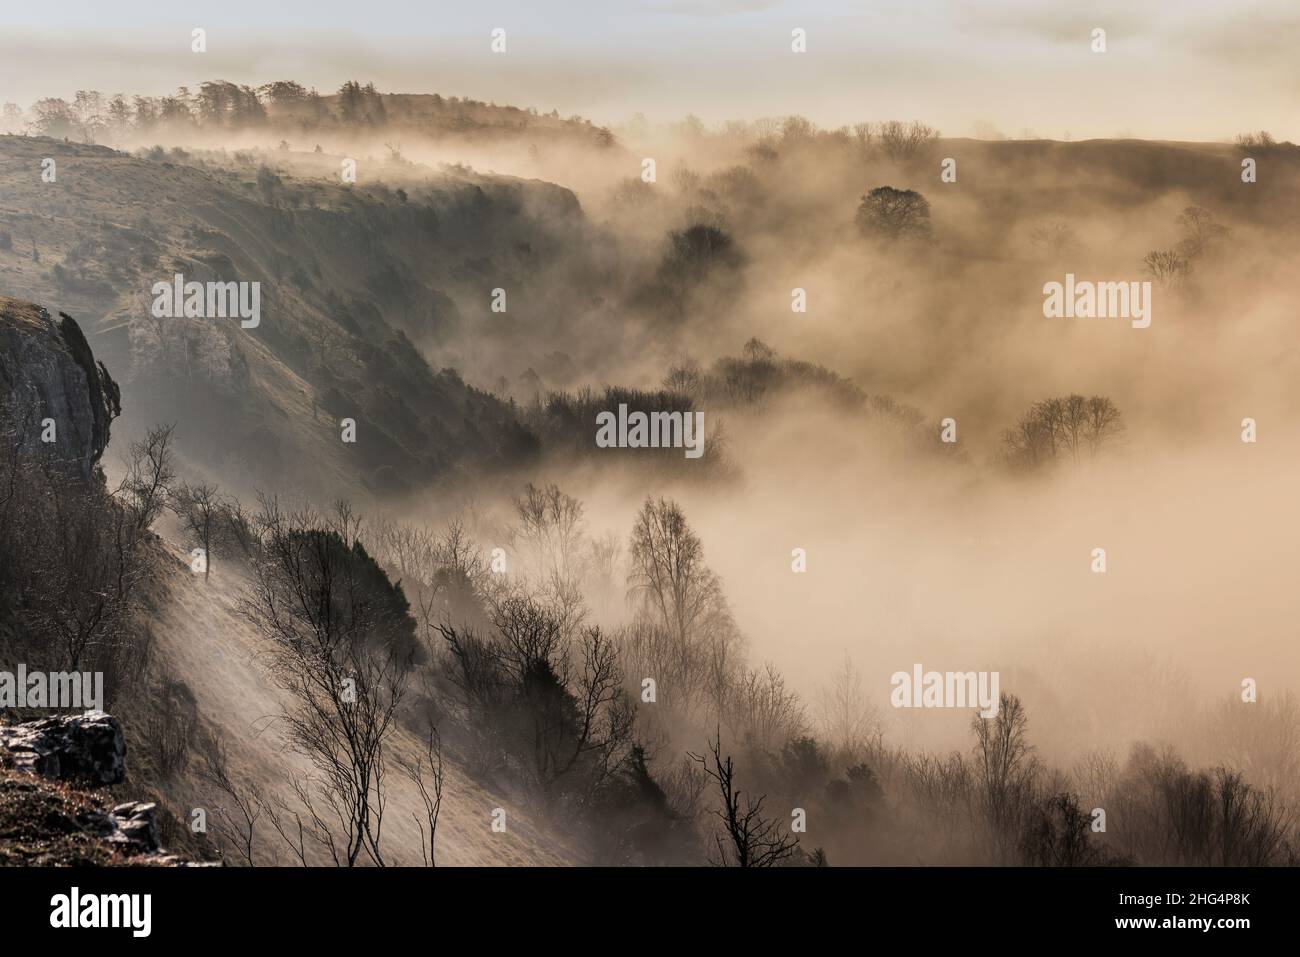 Scout Scar, Cumbria, England, as the sun broke through the mist 18th January 2022.  Taken from the edge of the cliffs looking eastwards with the winters sun low over the horizon, picking out the trees in the mist.. Credit: Russell Millner/Alamy Live News Stock Photo